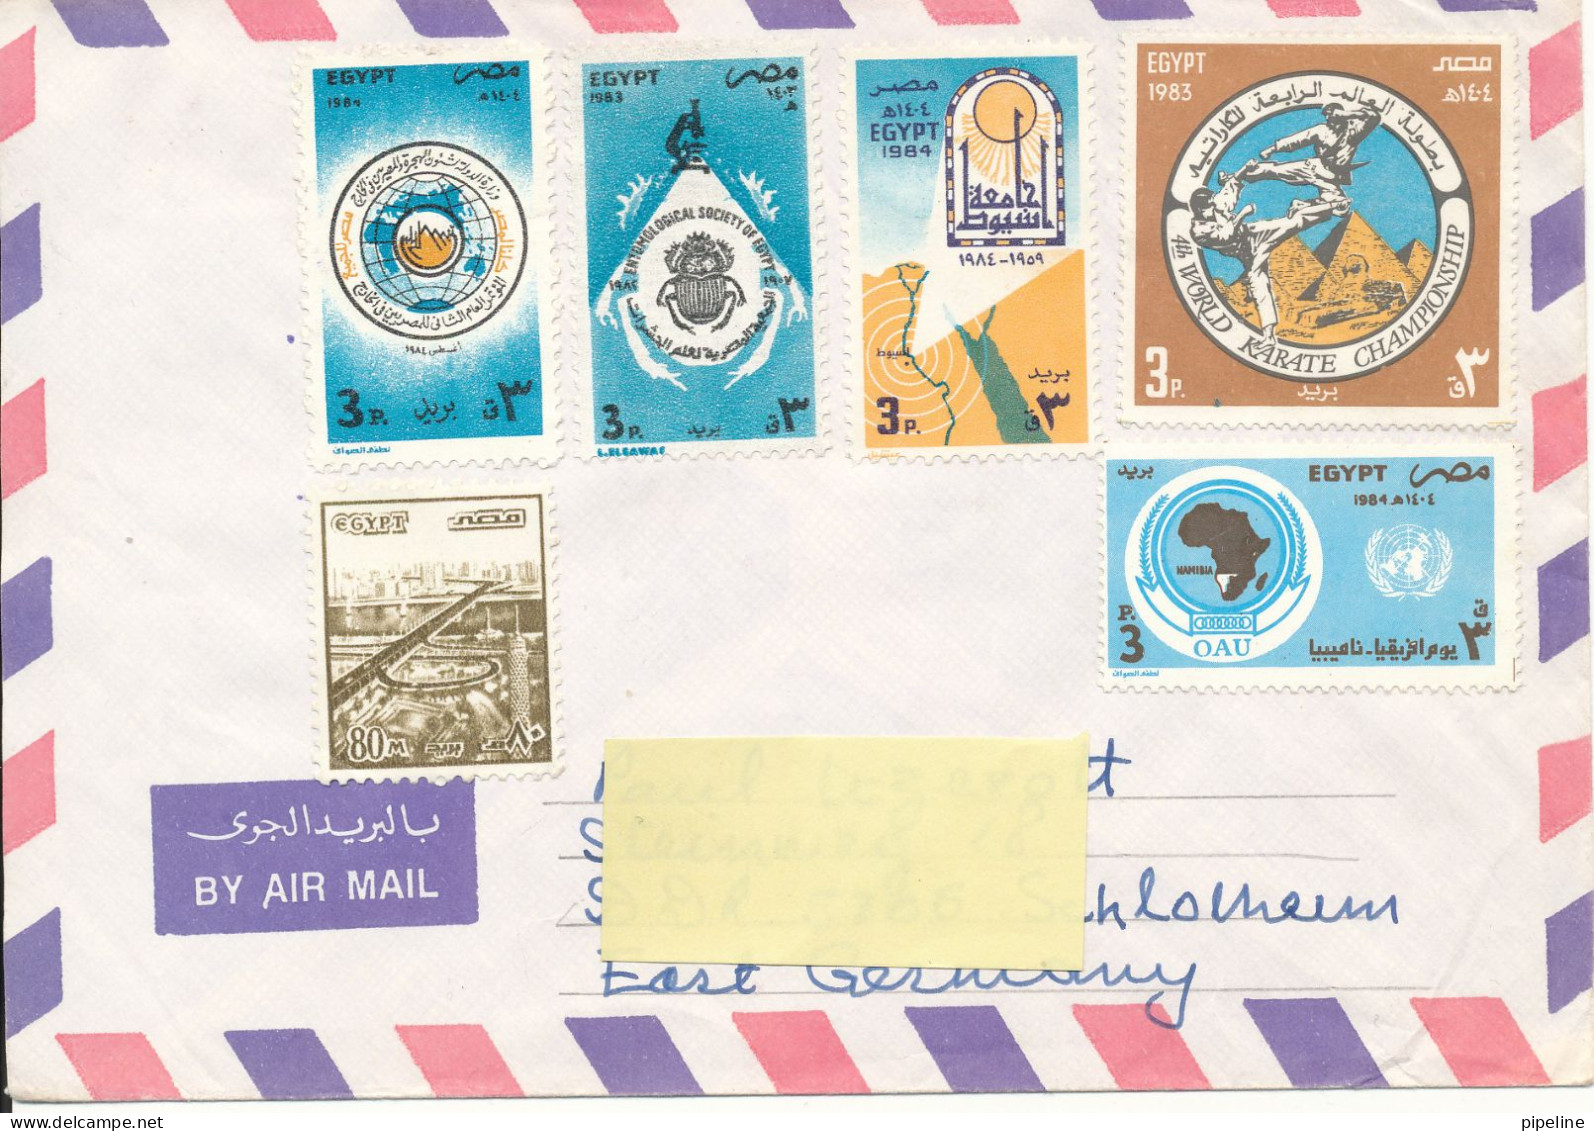 Egypt Air Mail Cover Sent To Germany DDR Topic Stamps No Postmarks On Stamps Or Cover - Luchtpost